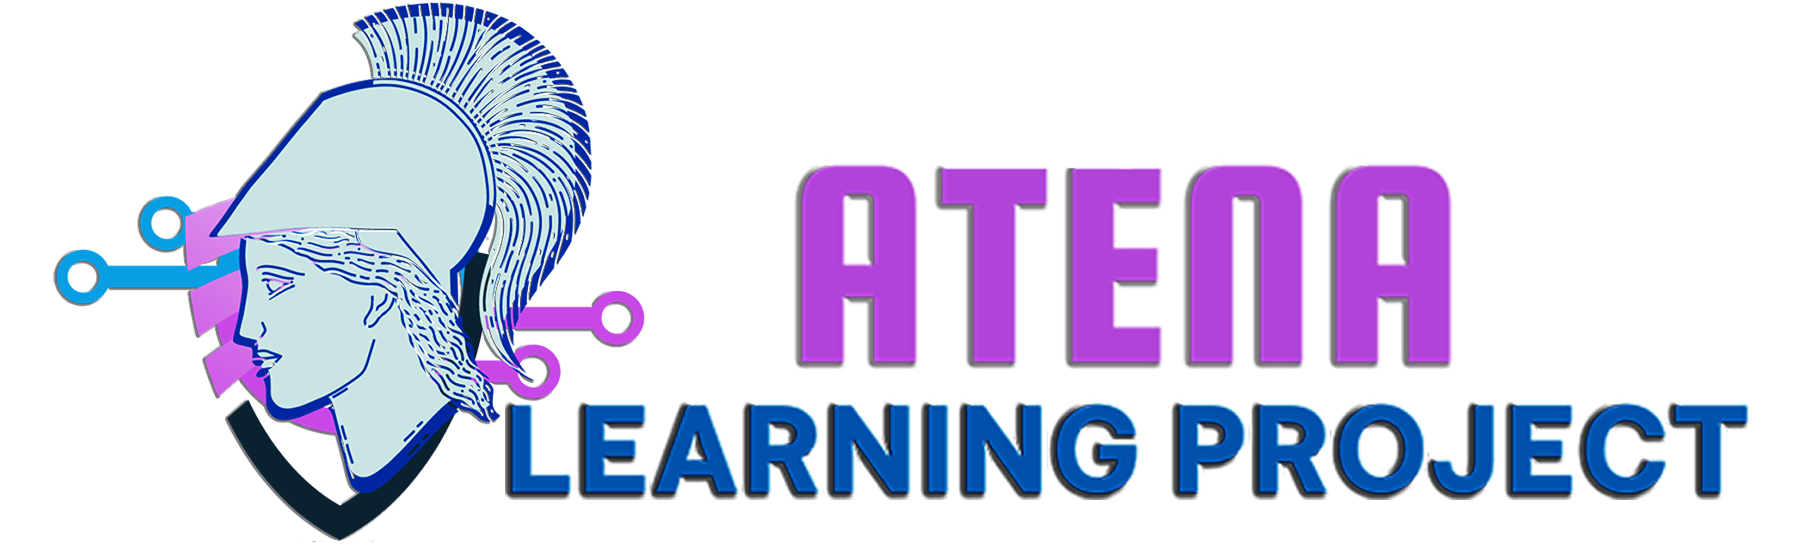 Atena Learning Project